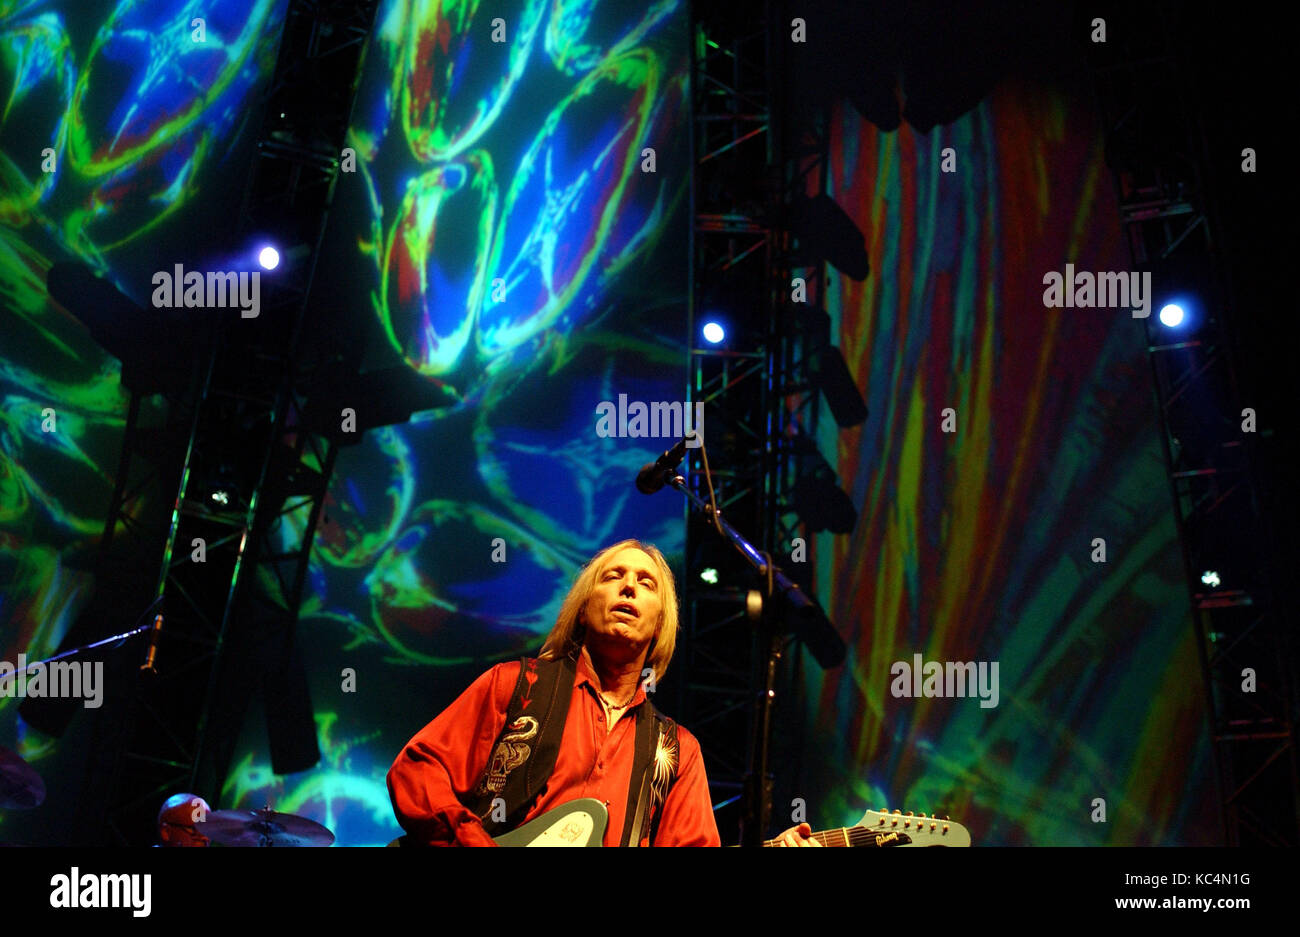 Portsmouth, VA, USA. 12th Aug, 2003. TOM PETTY of TOM PETTY & THE HEARTBREAKERS blows away the crowd at Netelos Pav. in Portsmouth Va. on 12 August 2003. Credit: Jeff Moore/ZUMA Wire/Alamy Live News Stock Photo